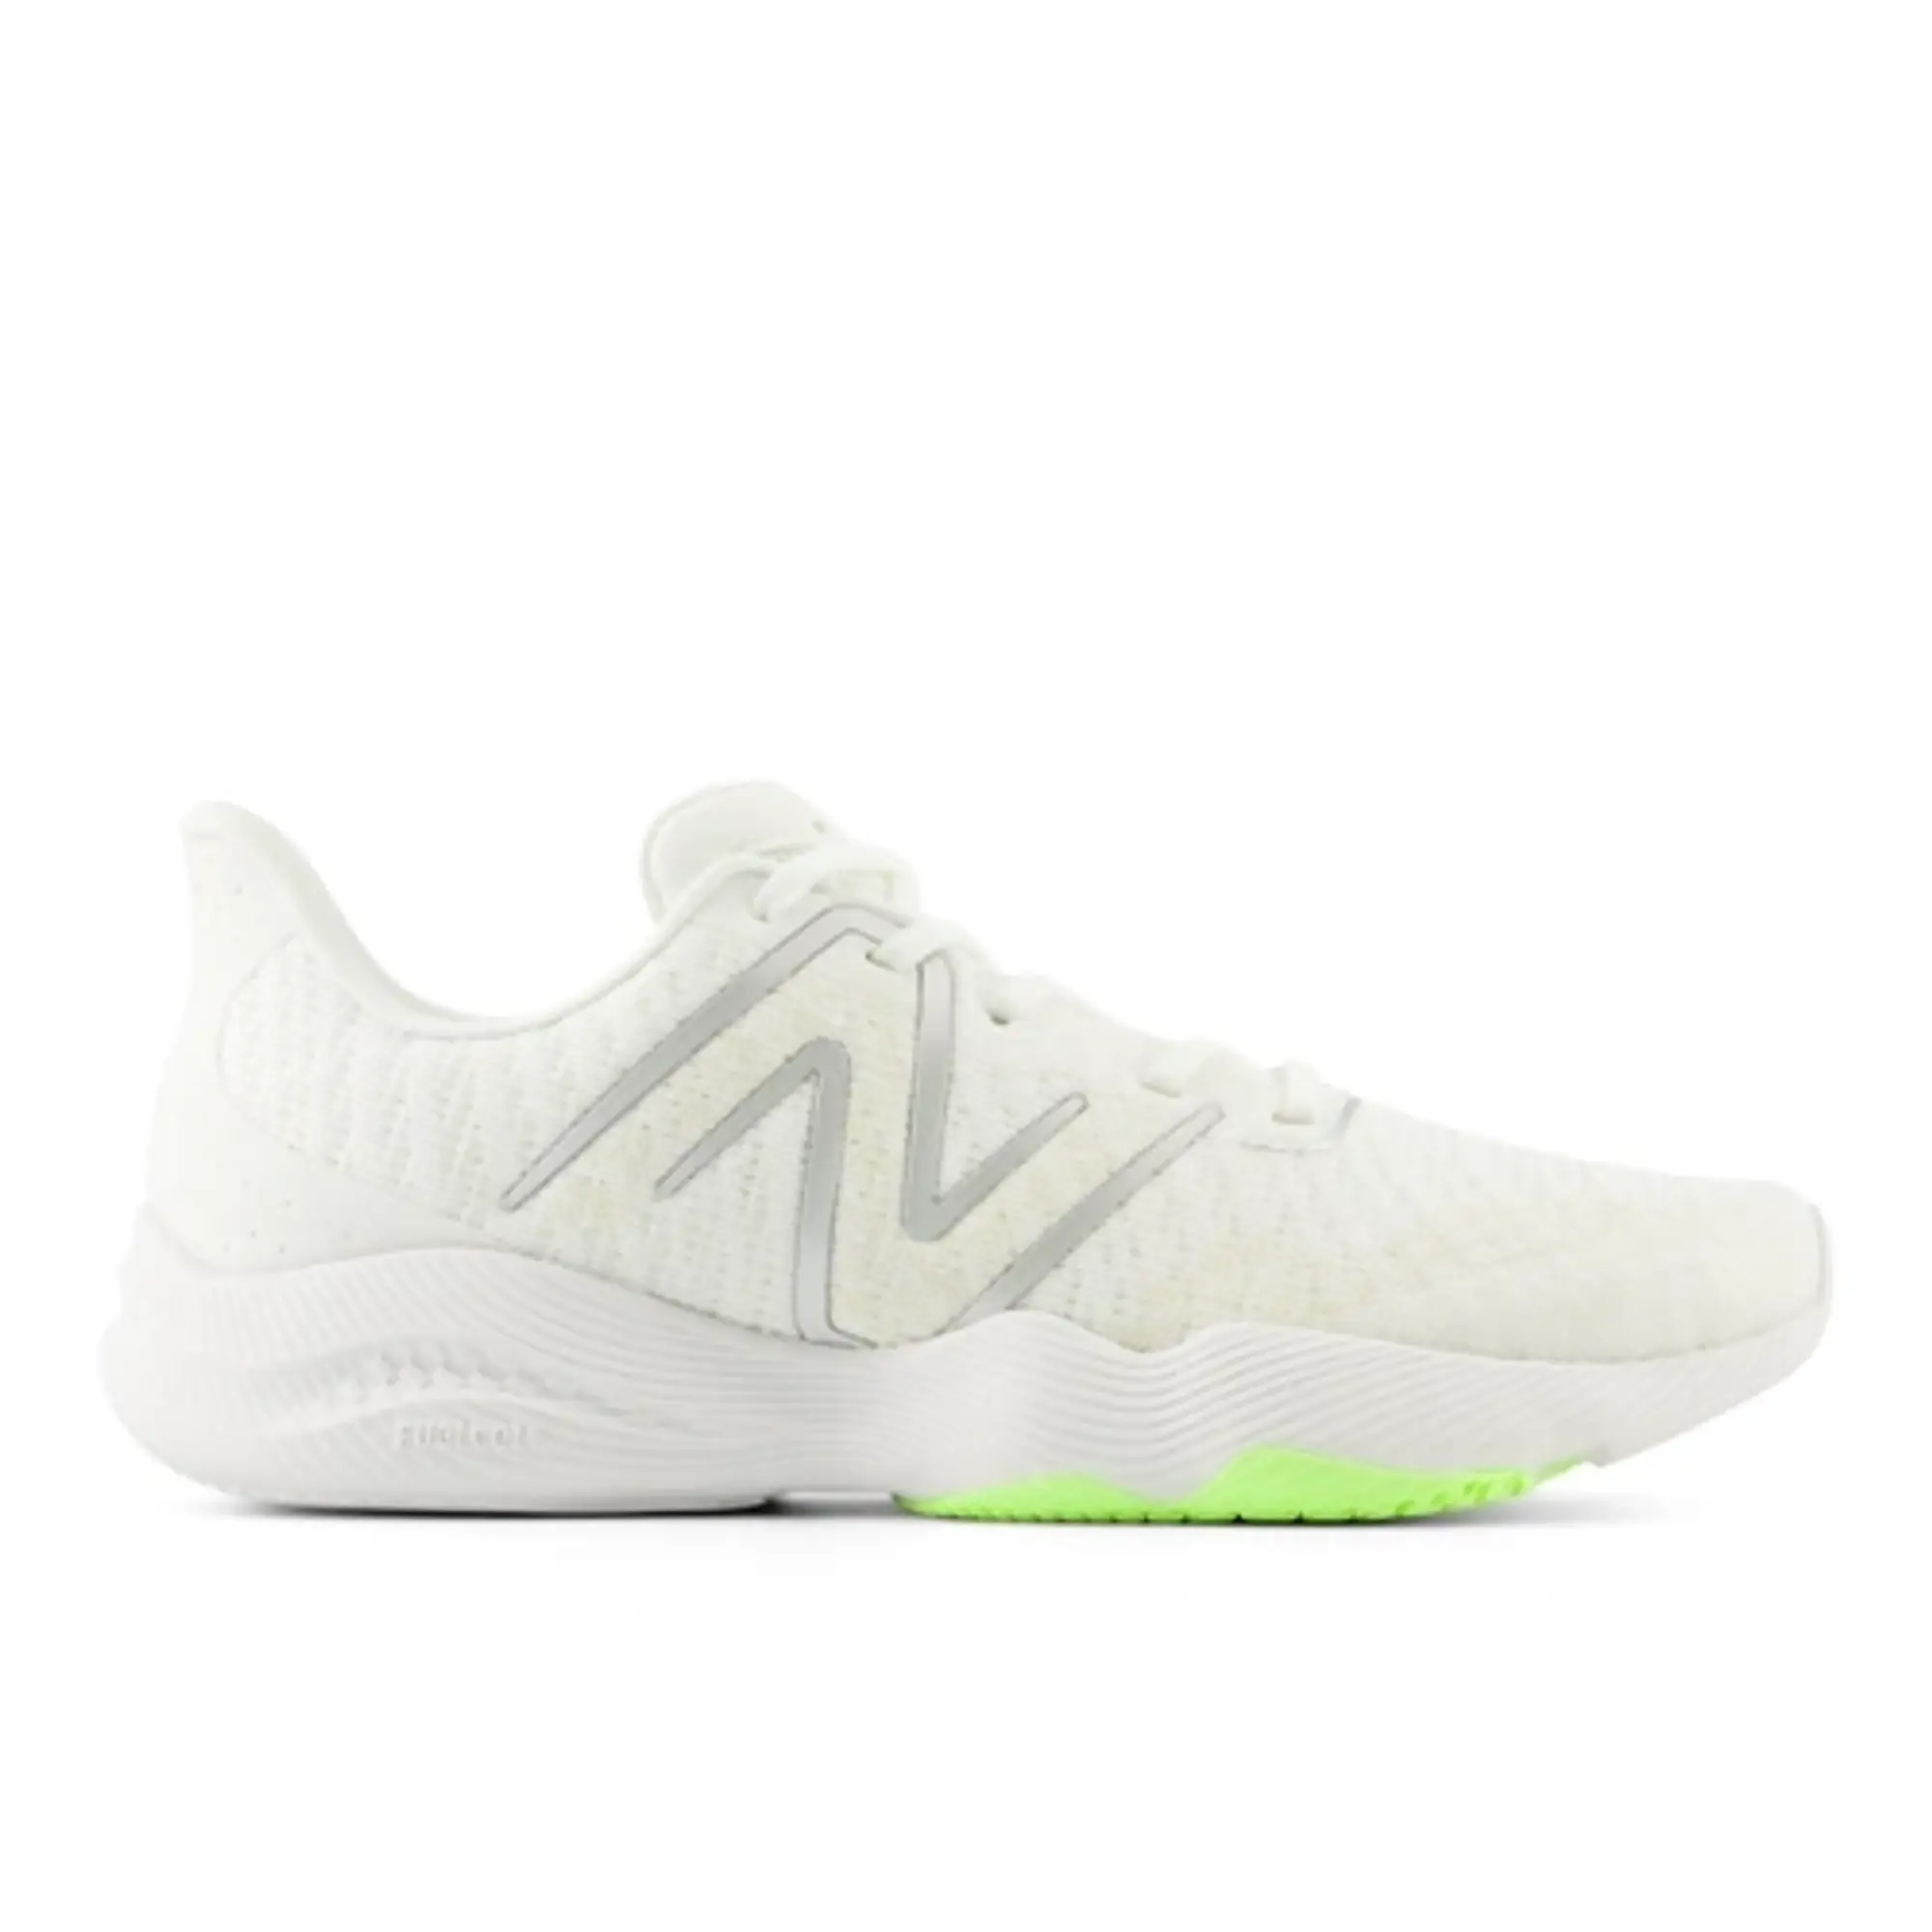 New Balance Women's FuelCell Shift TR v2 in White/Green Textile